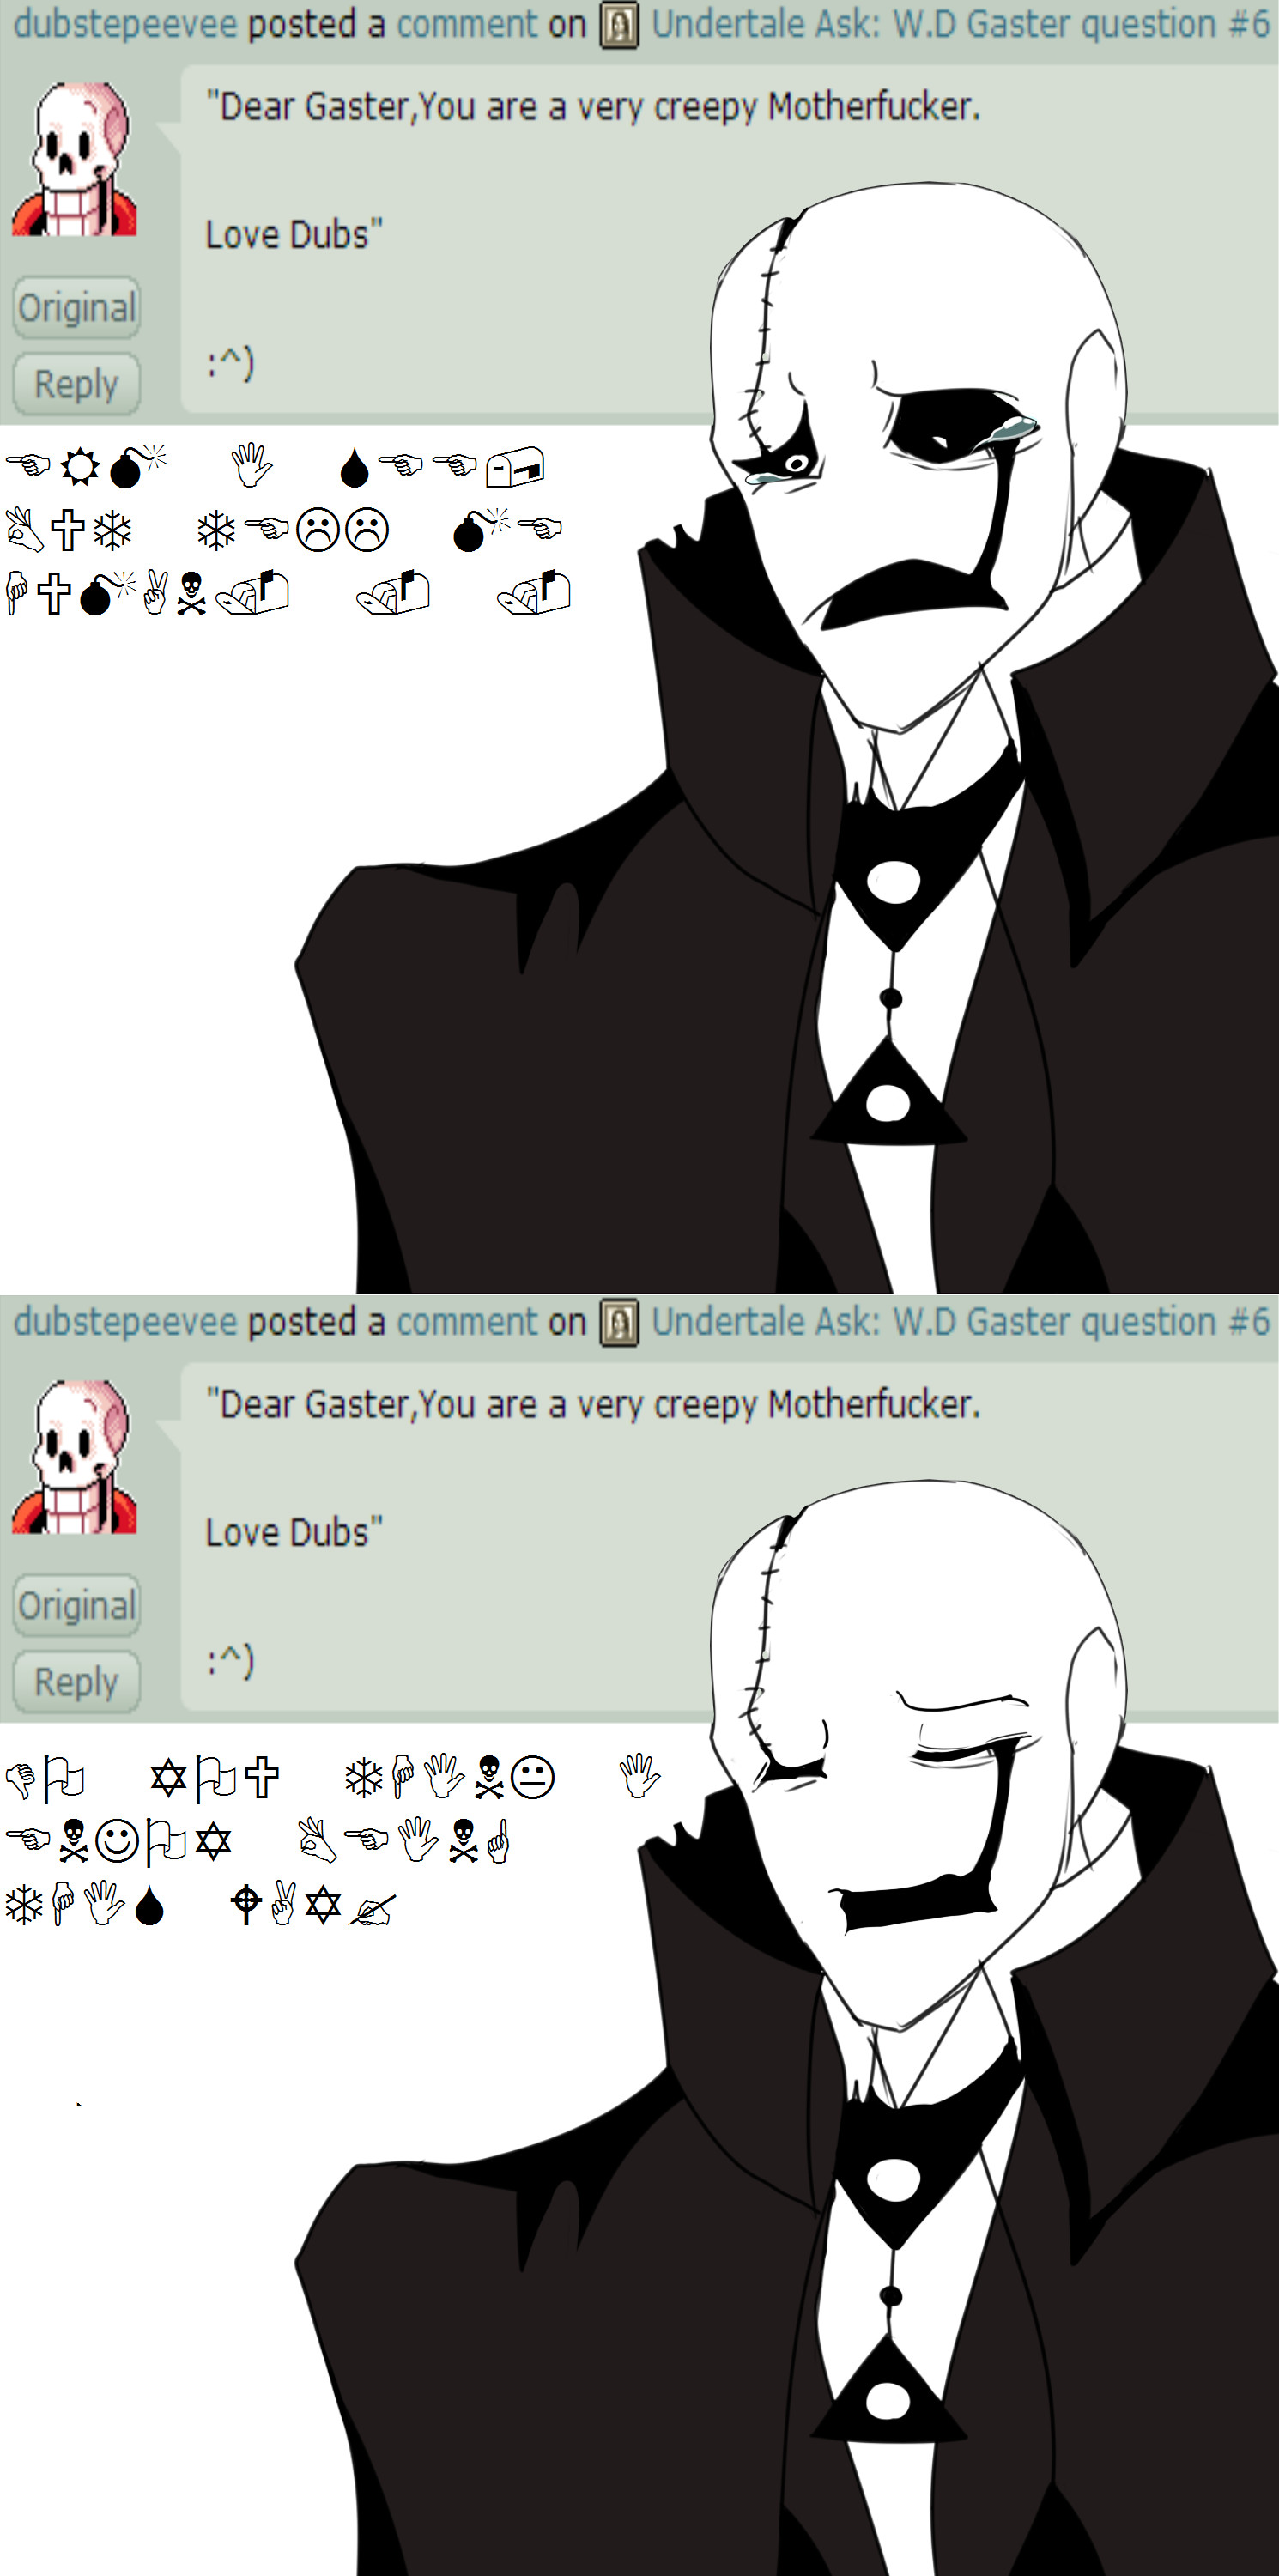 1490x3001 ... Undertale Ask: W.D Gaster question #7 by The-Star-Hunter